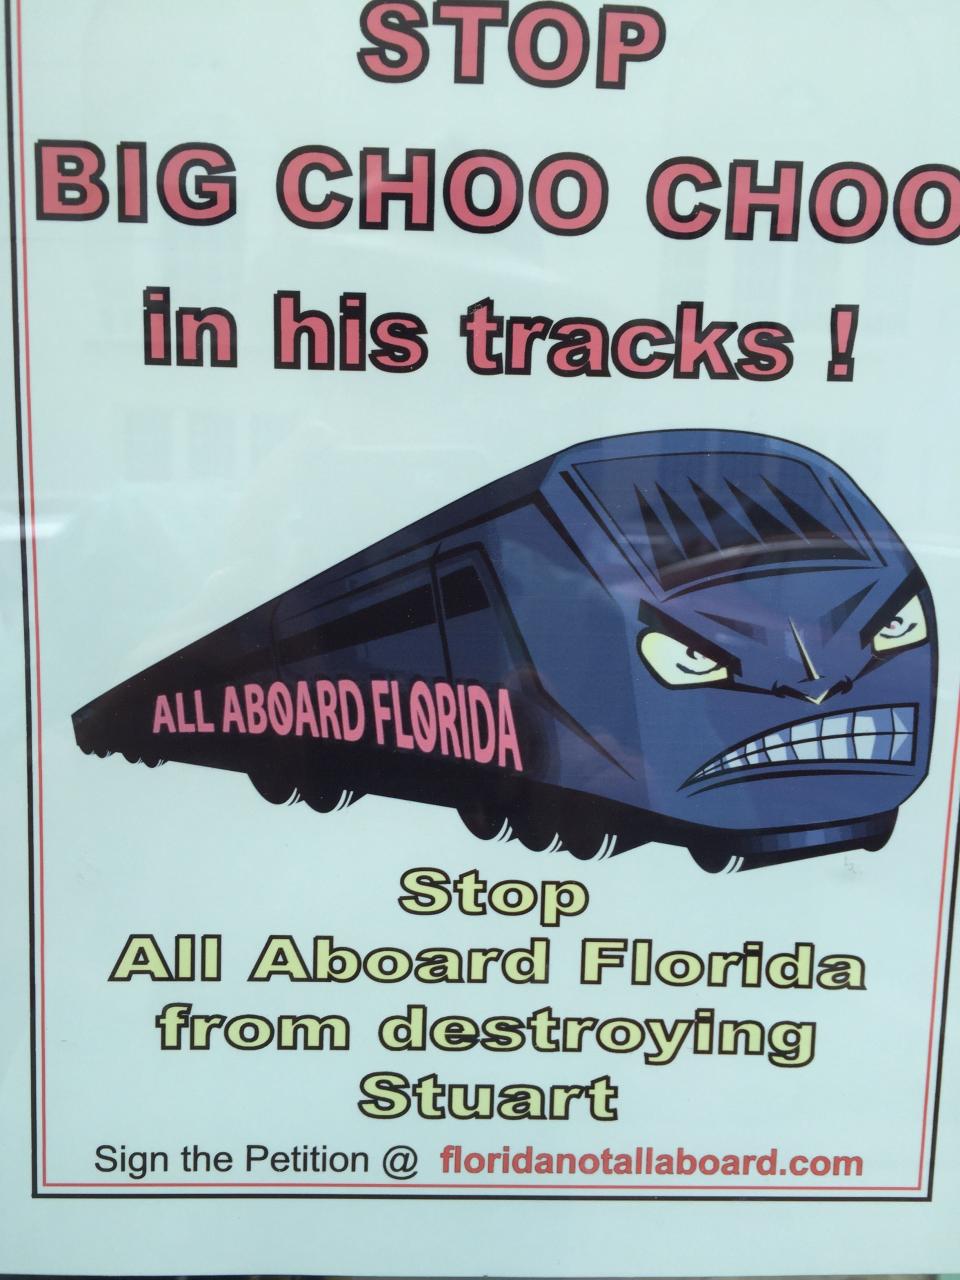 William Coulson said he took a picture of this flyer warning about All Aboard Florida, later named Brightline, in the mid-2010s at a storefront in Stuart.